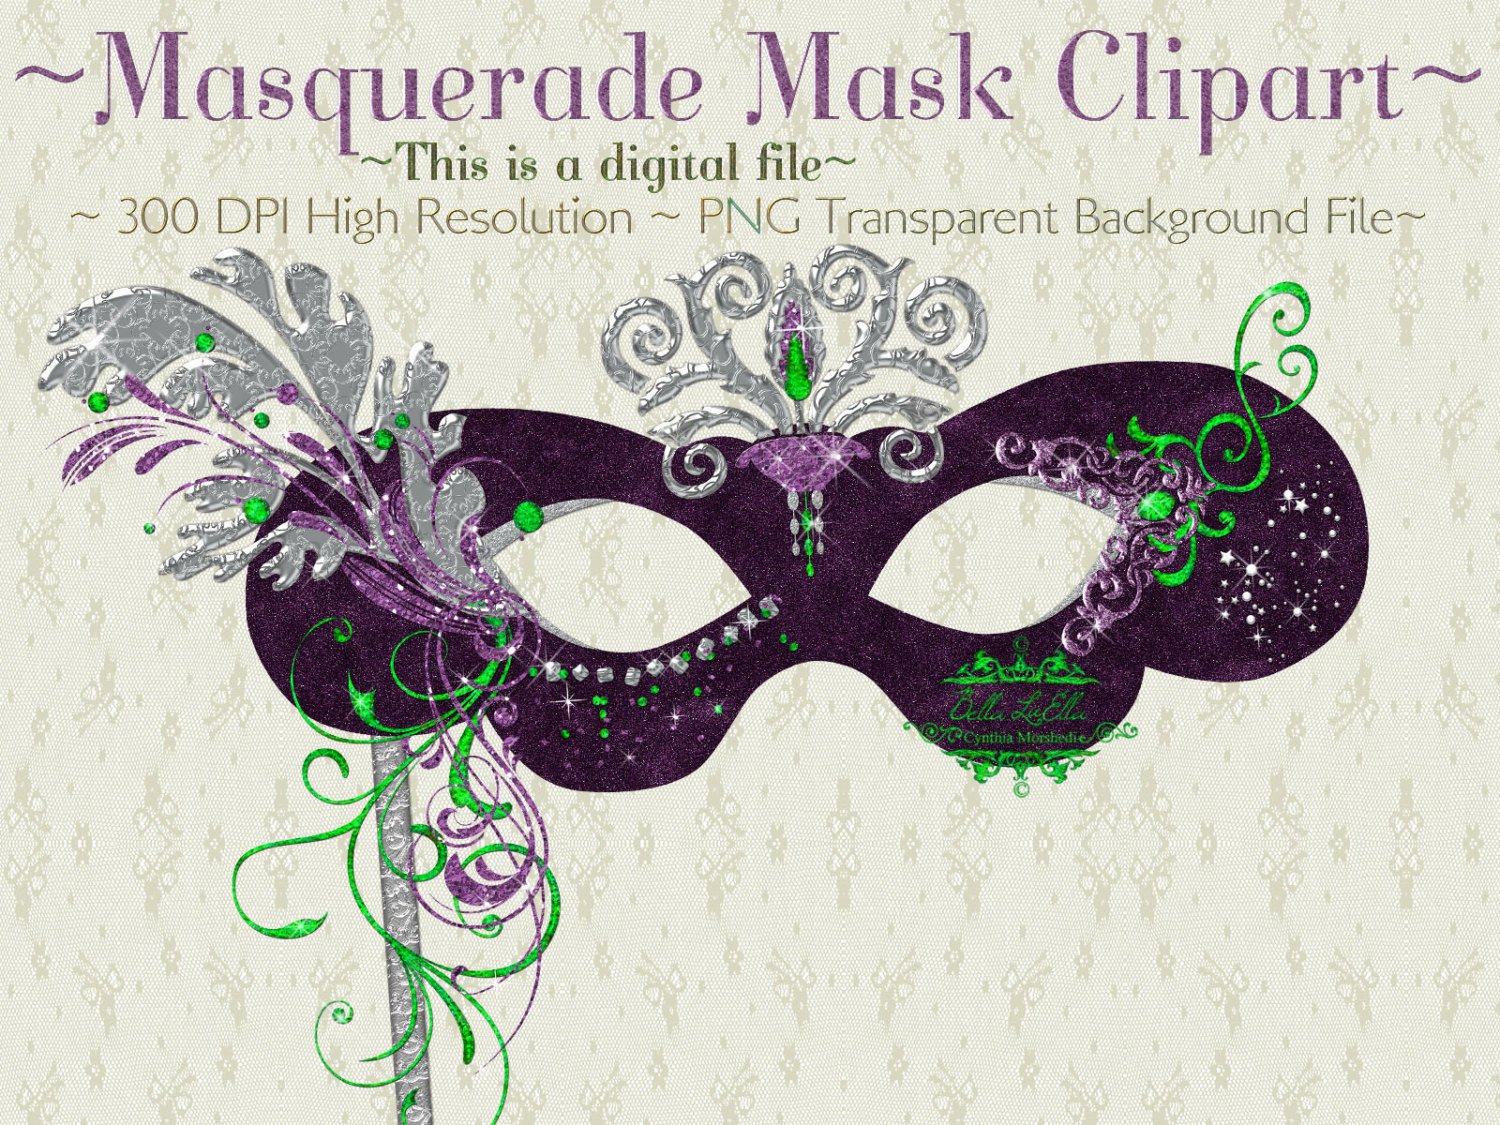 Masquerade Mask Clipart By Bellasscrapsnclips On Etsy